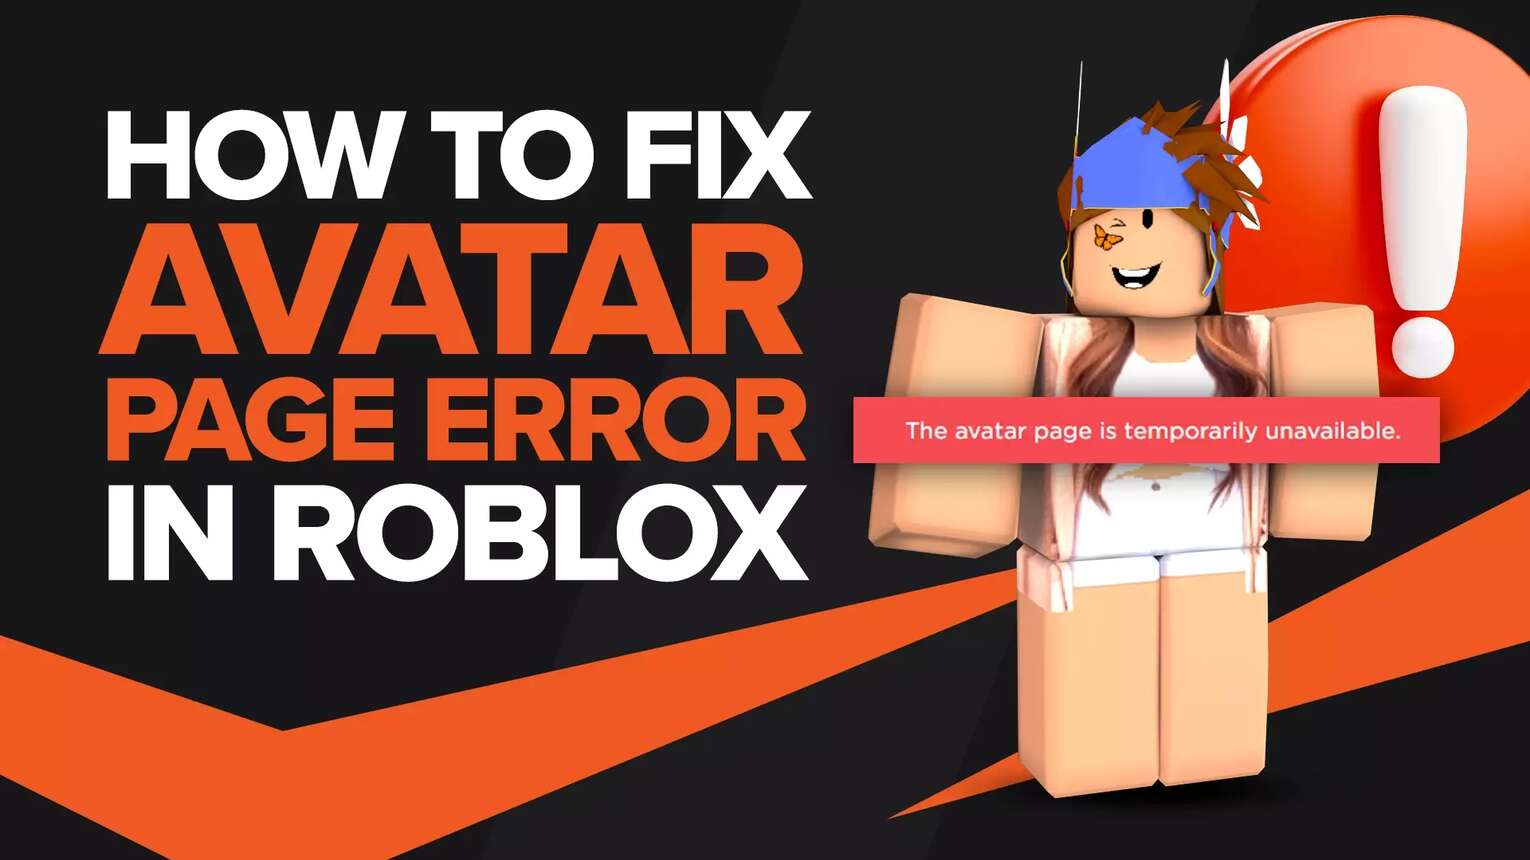 Draw your roblox avatar by Maribelcreates  Fiverr